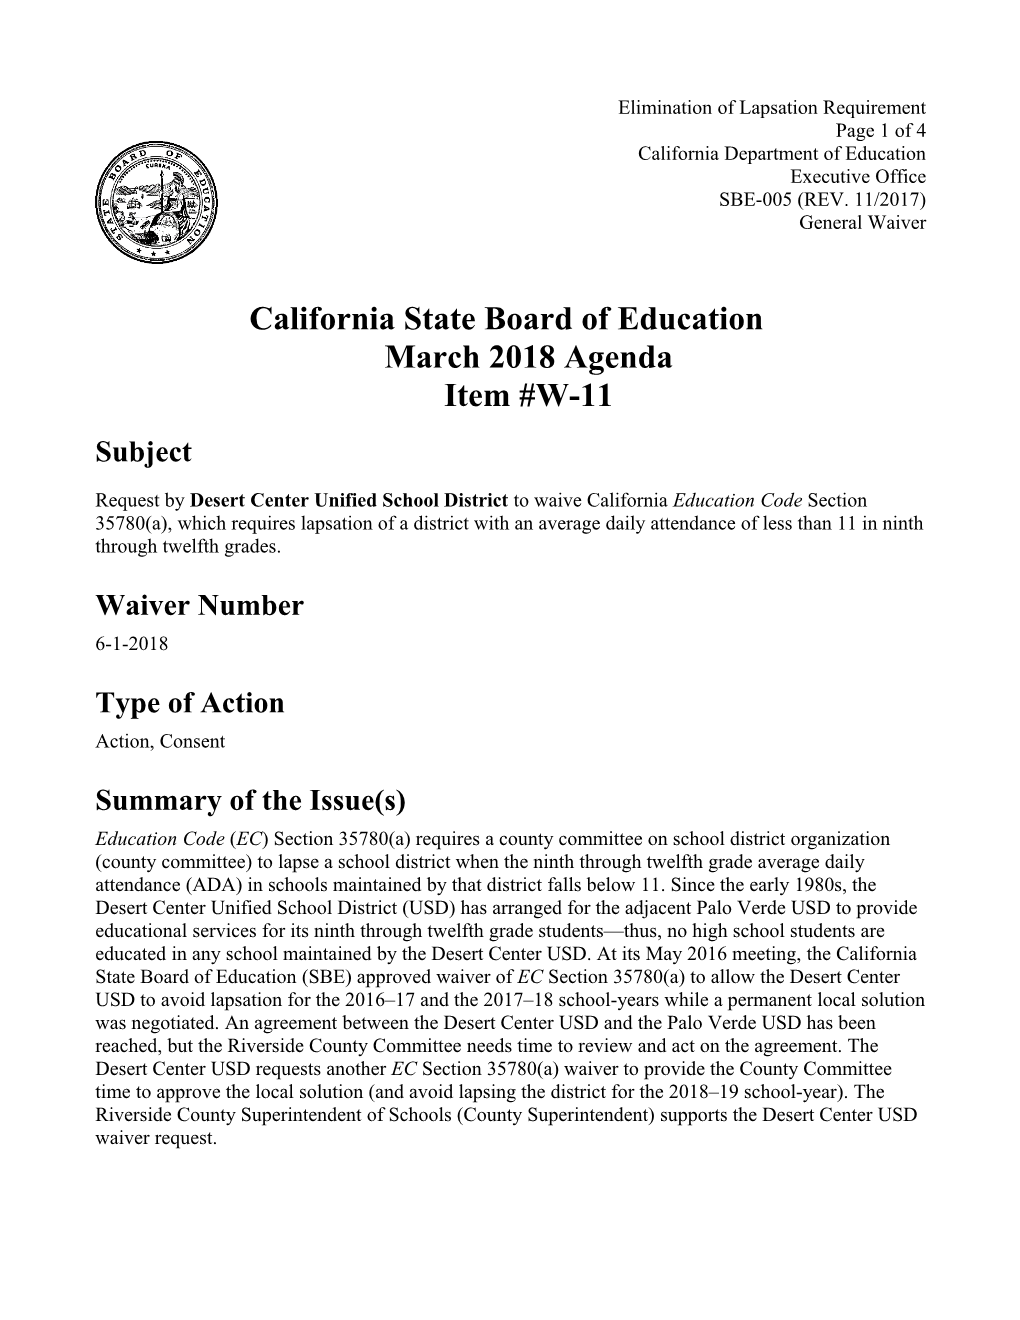 March 2018 Waiver Item W-11 - Meeting Agendas (CA State Board of Education)